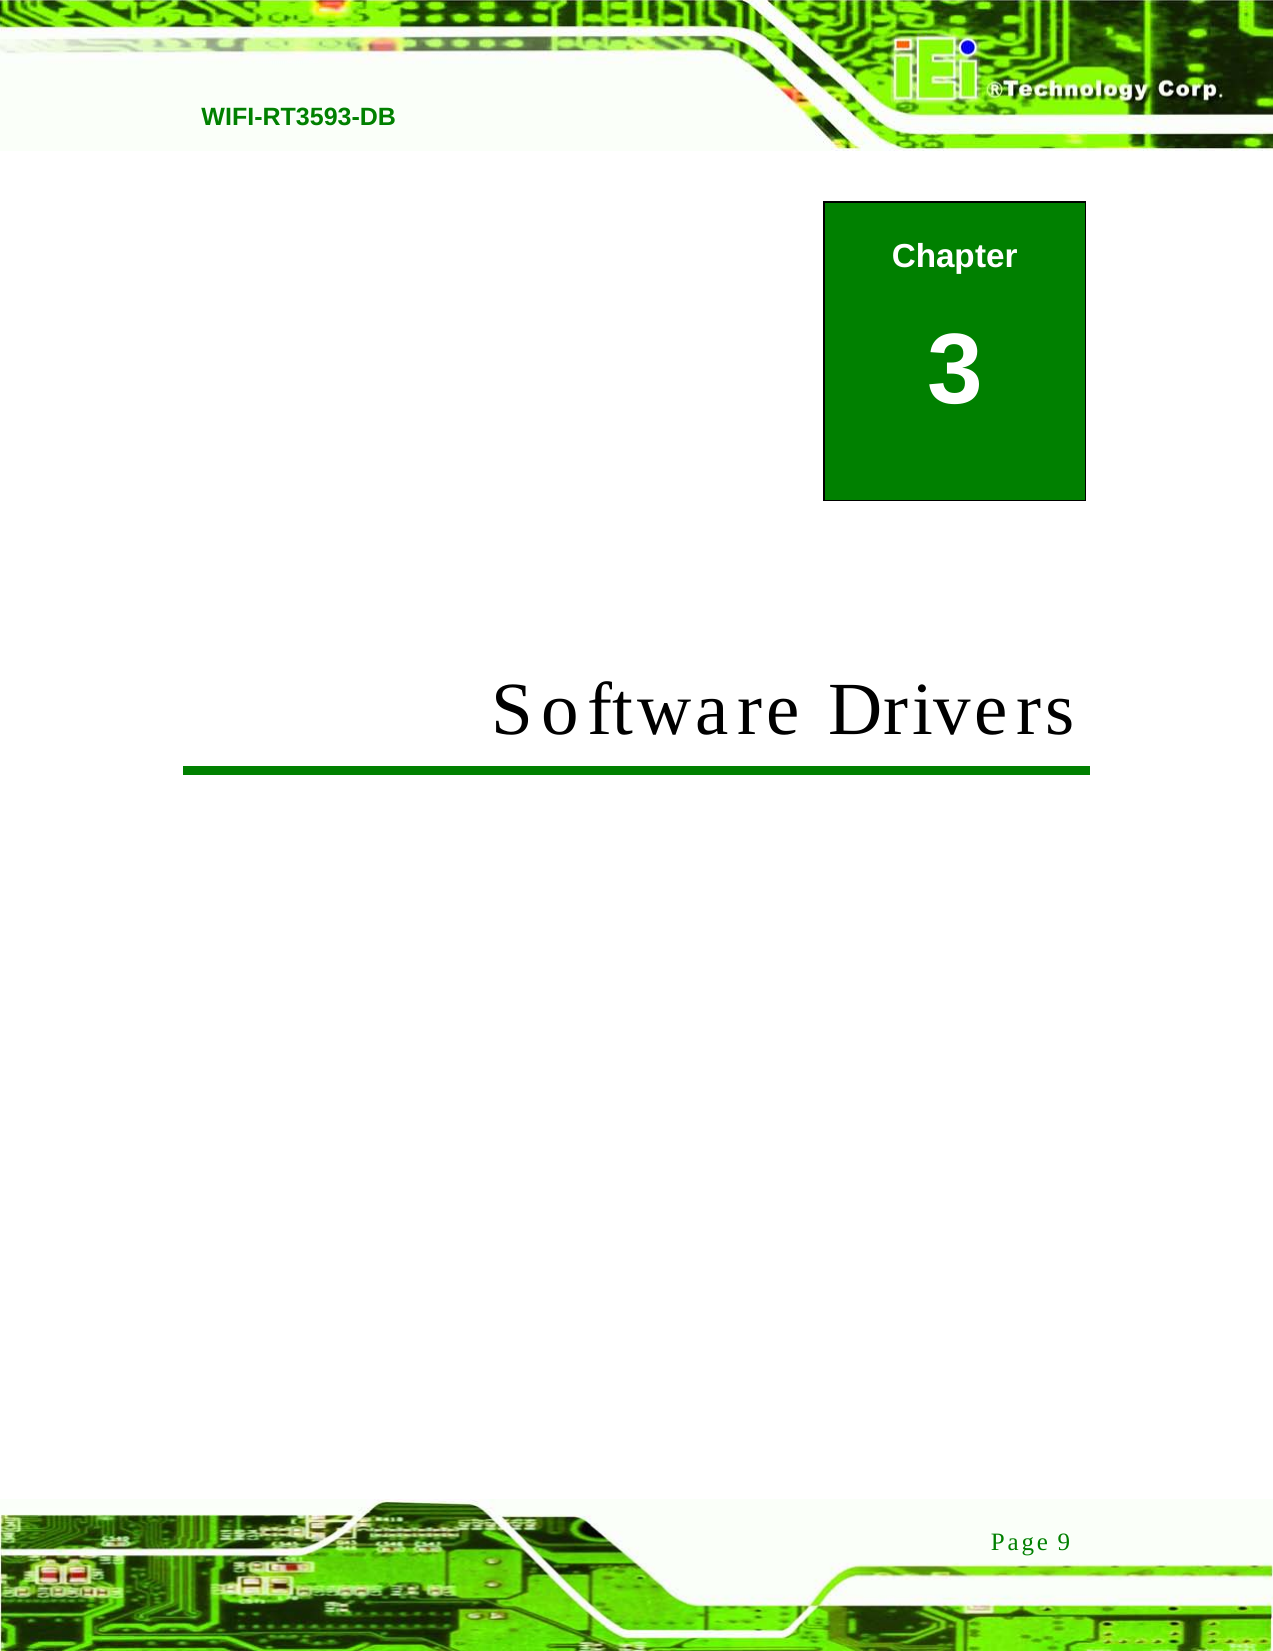   WIFI-RT3593-DB Page 9             3 Software Drivers Chapter 3 